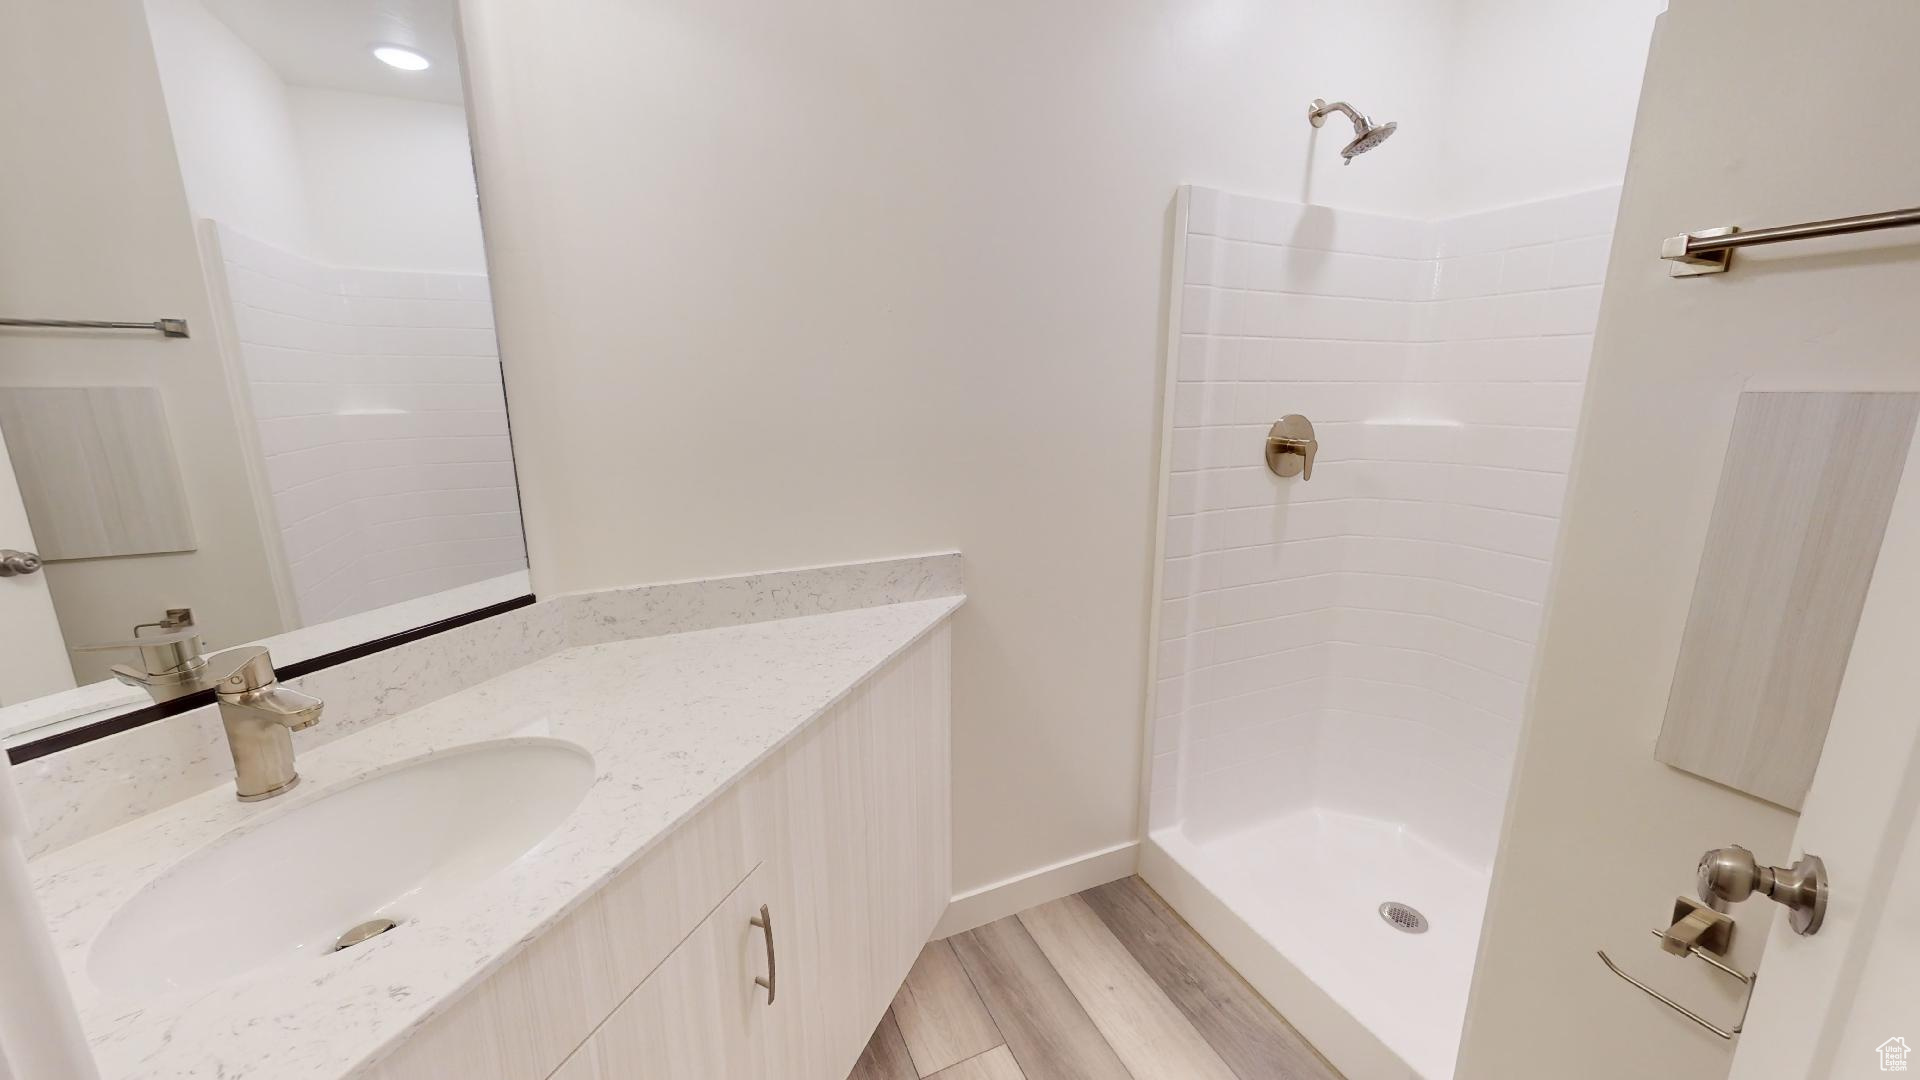 Bathroom with a shower, vanity, and hardwood / wood-style flooring